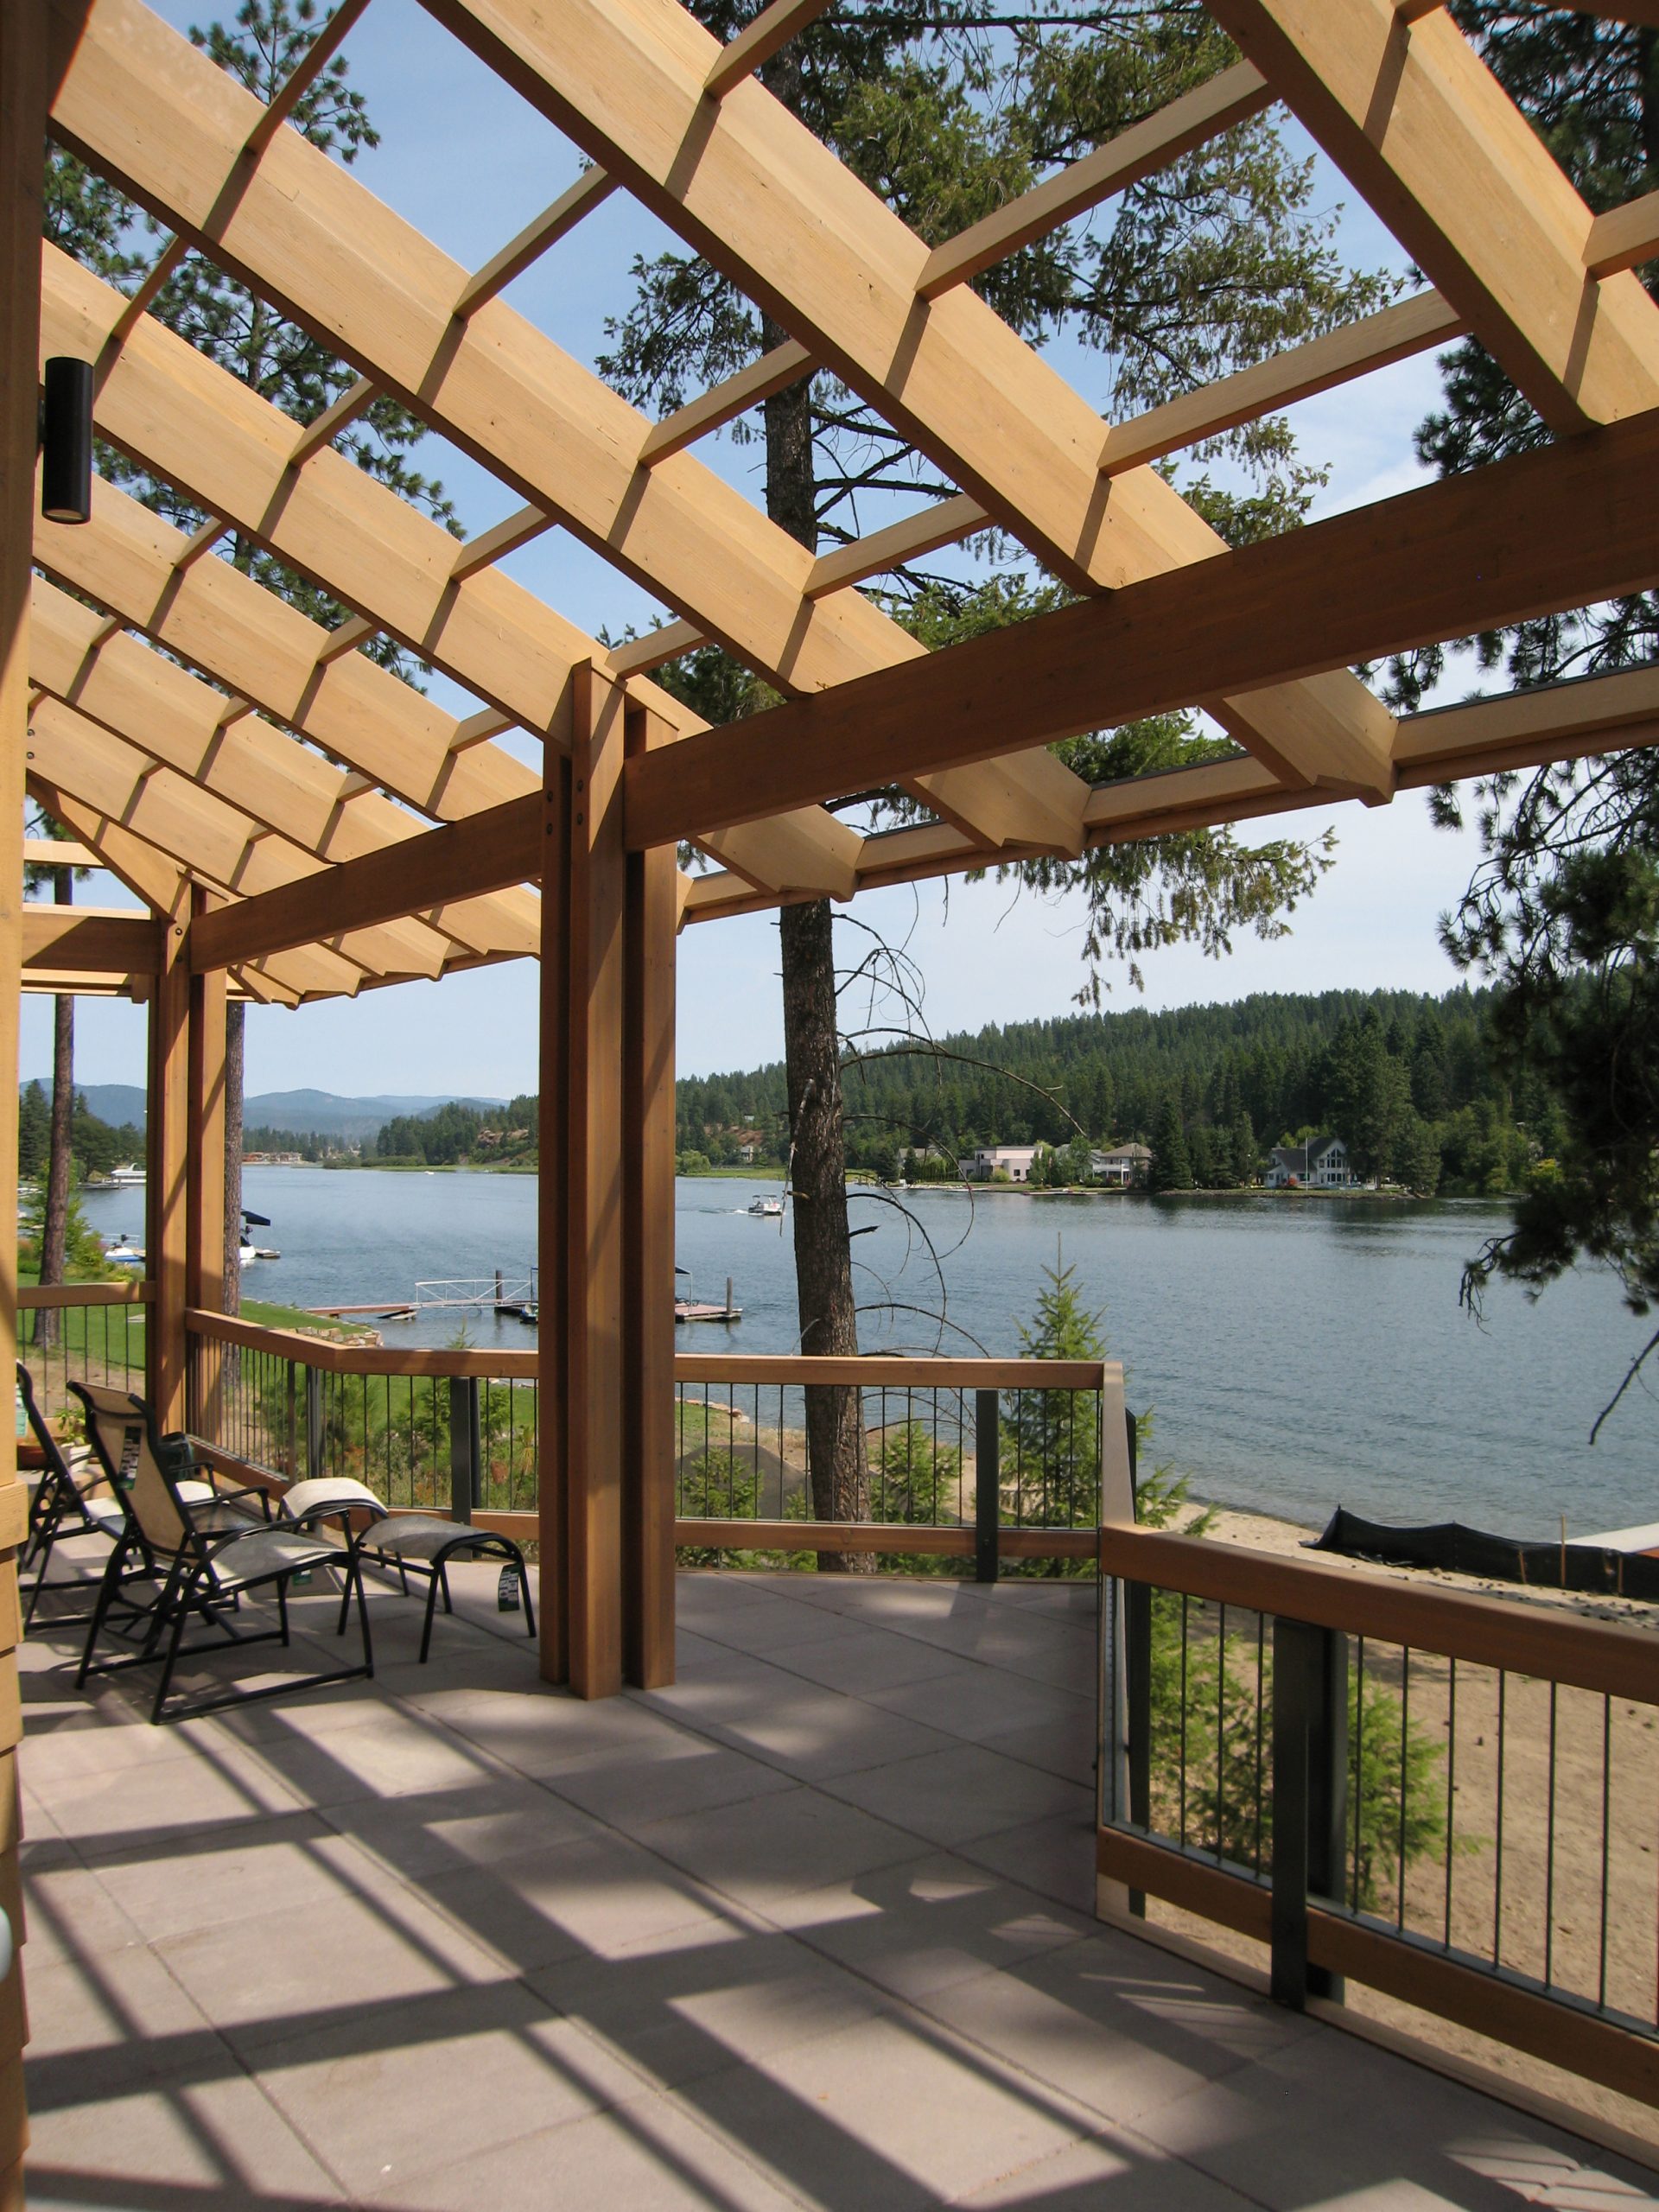 River residence is a custom home located in a beautiful waterfront setting on the Spokane River. The home features vaulted, wood-decked ceilings and a multitude of windows capturing the river views from almost every room.